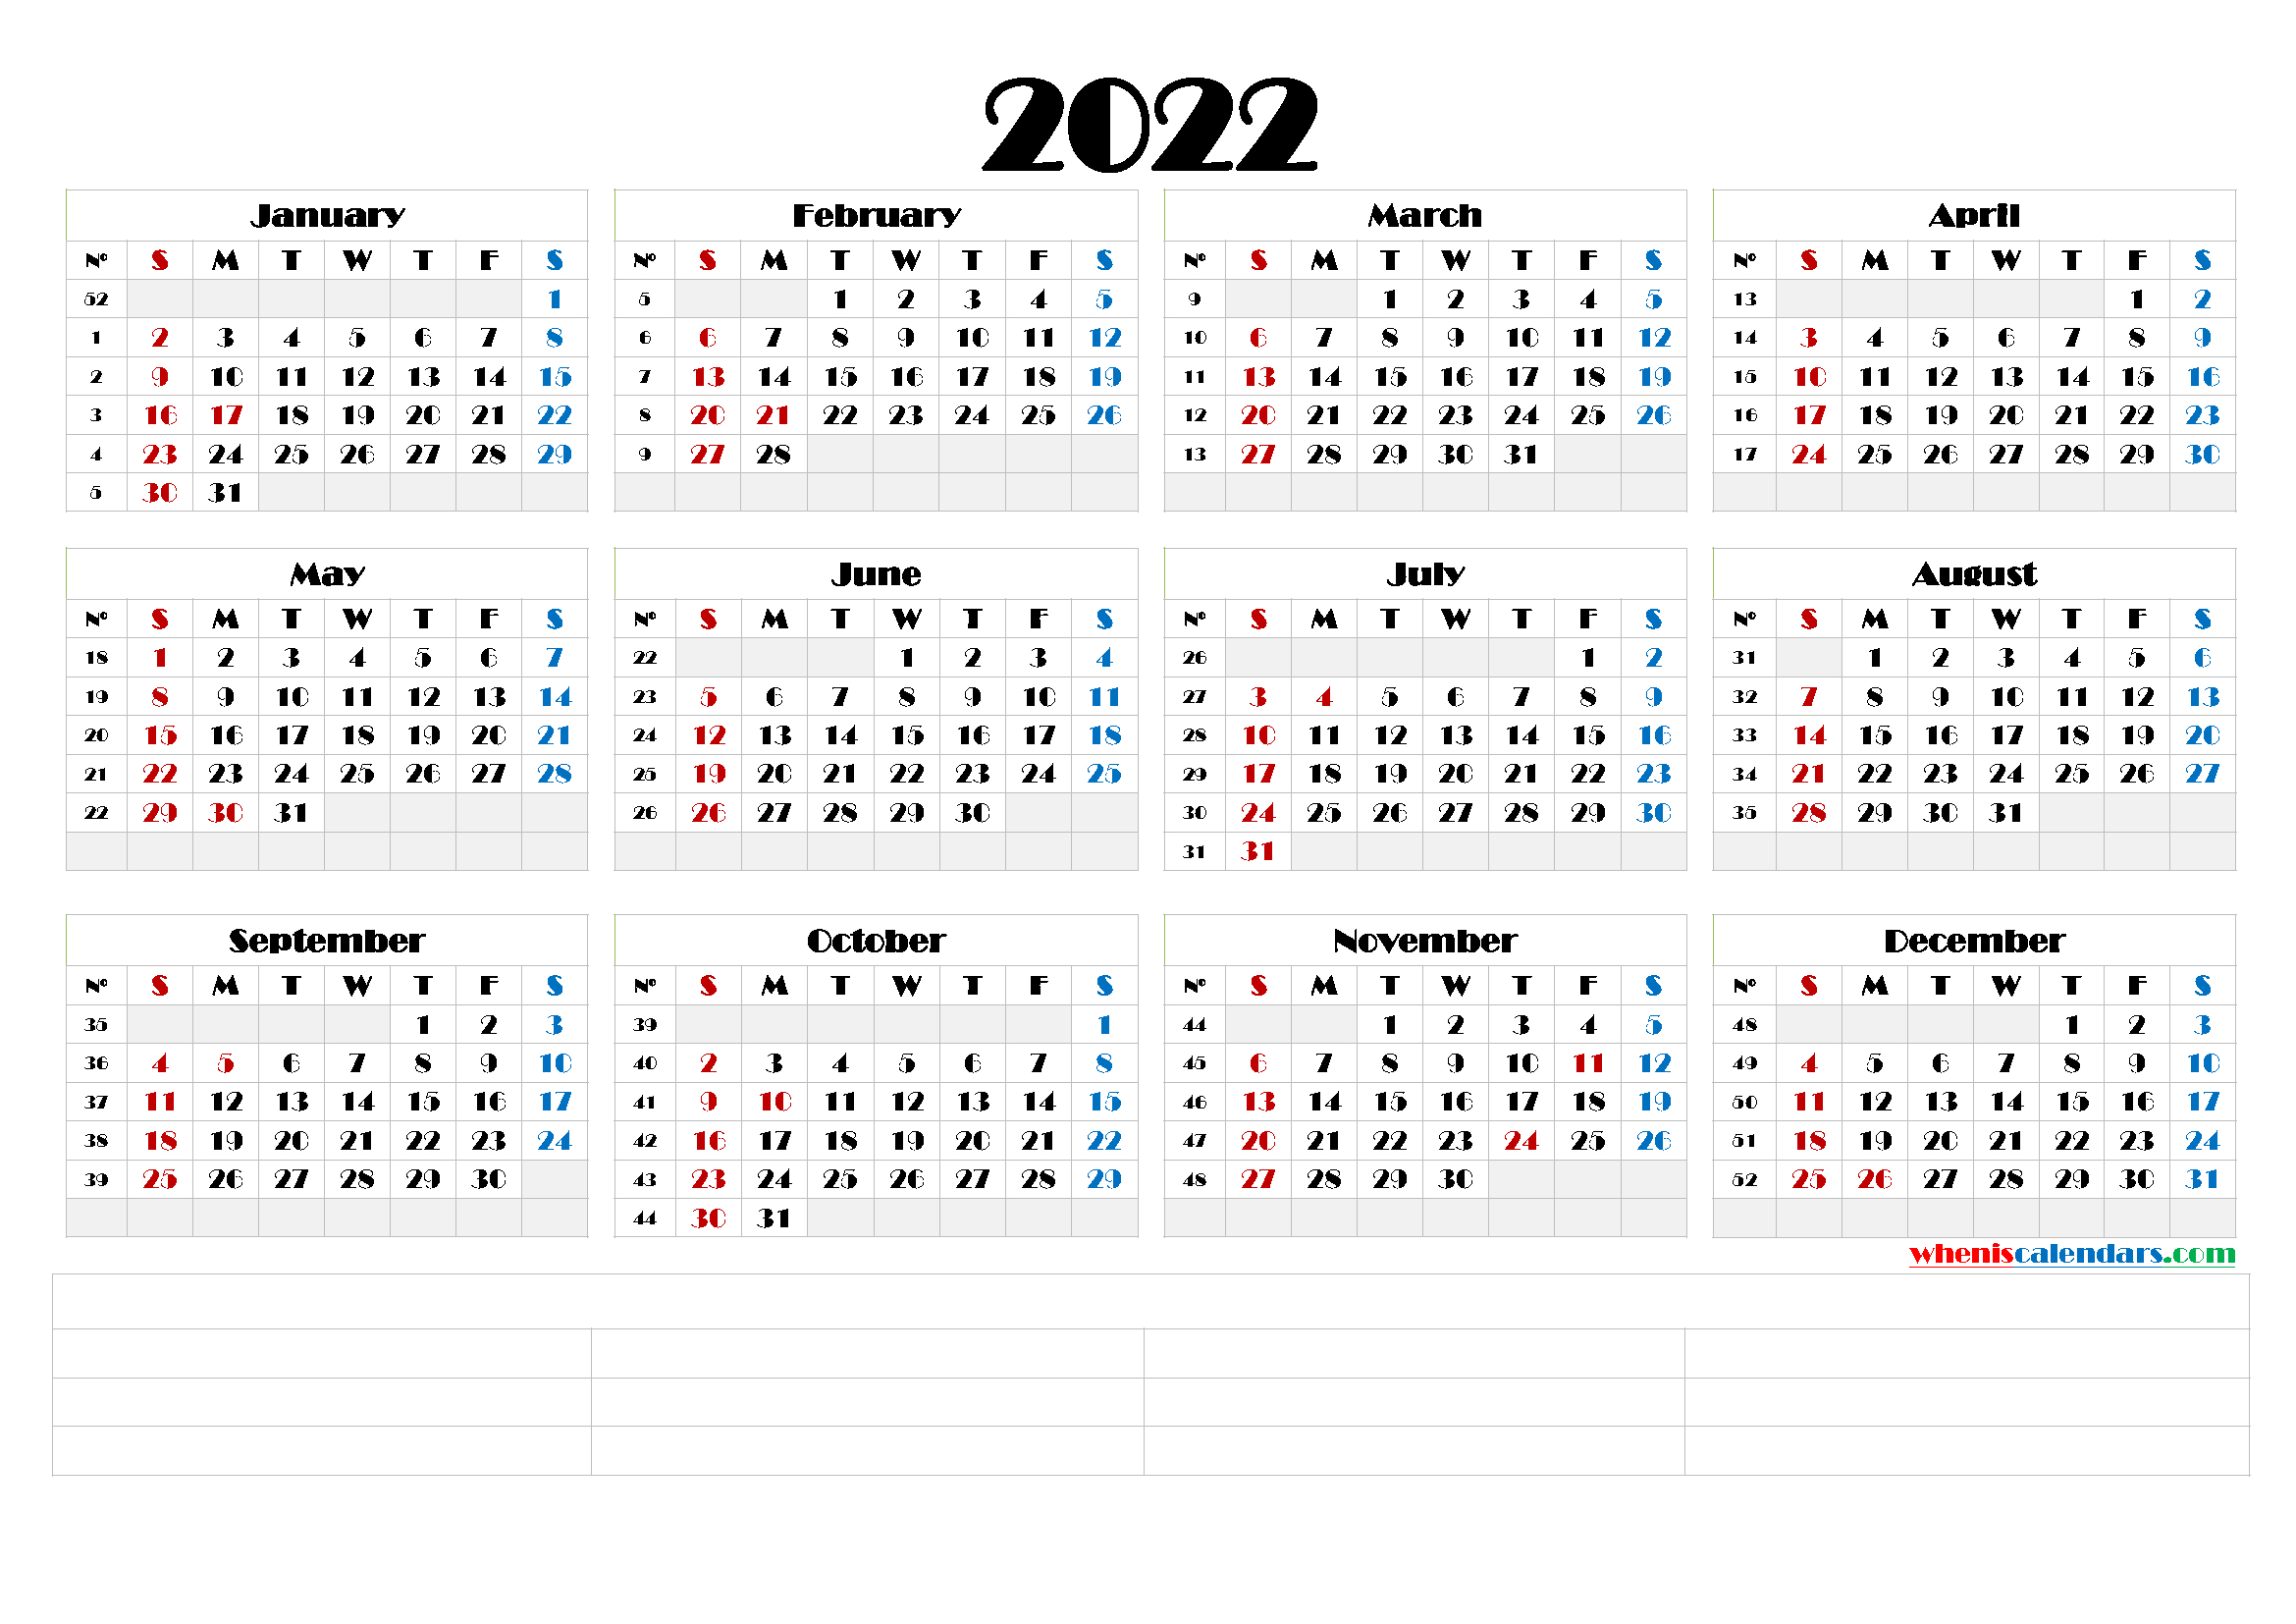 2022 Yearly Calendar Template Word - Calendraex